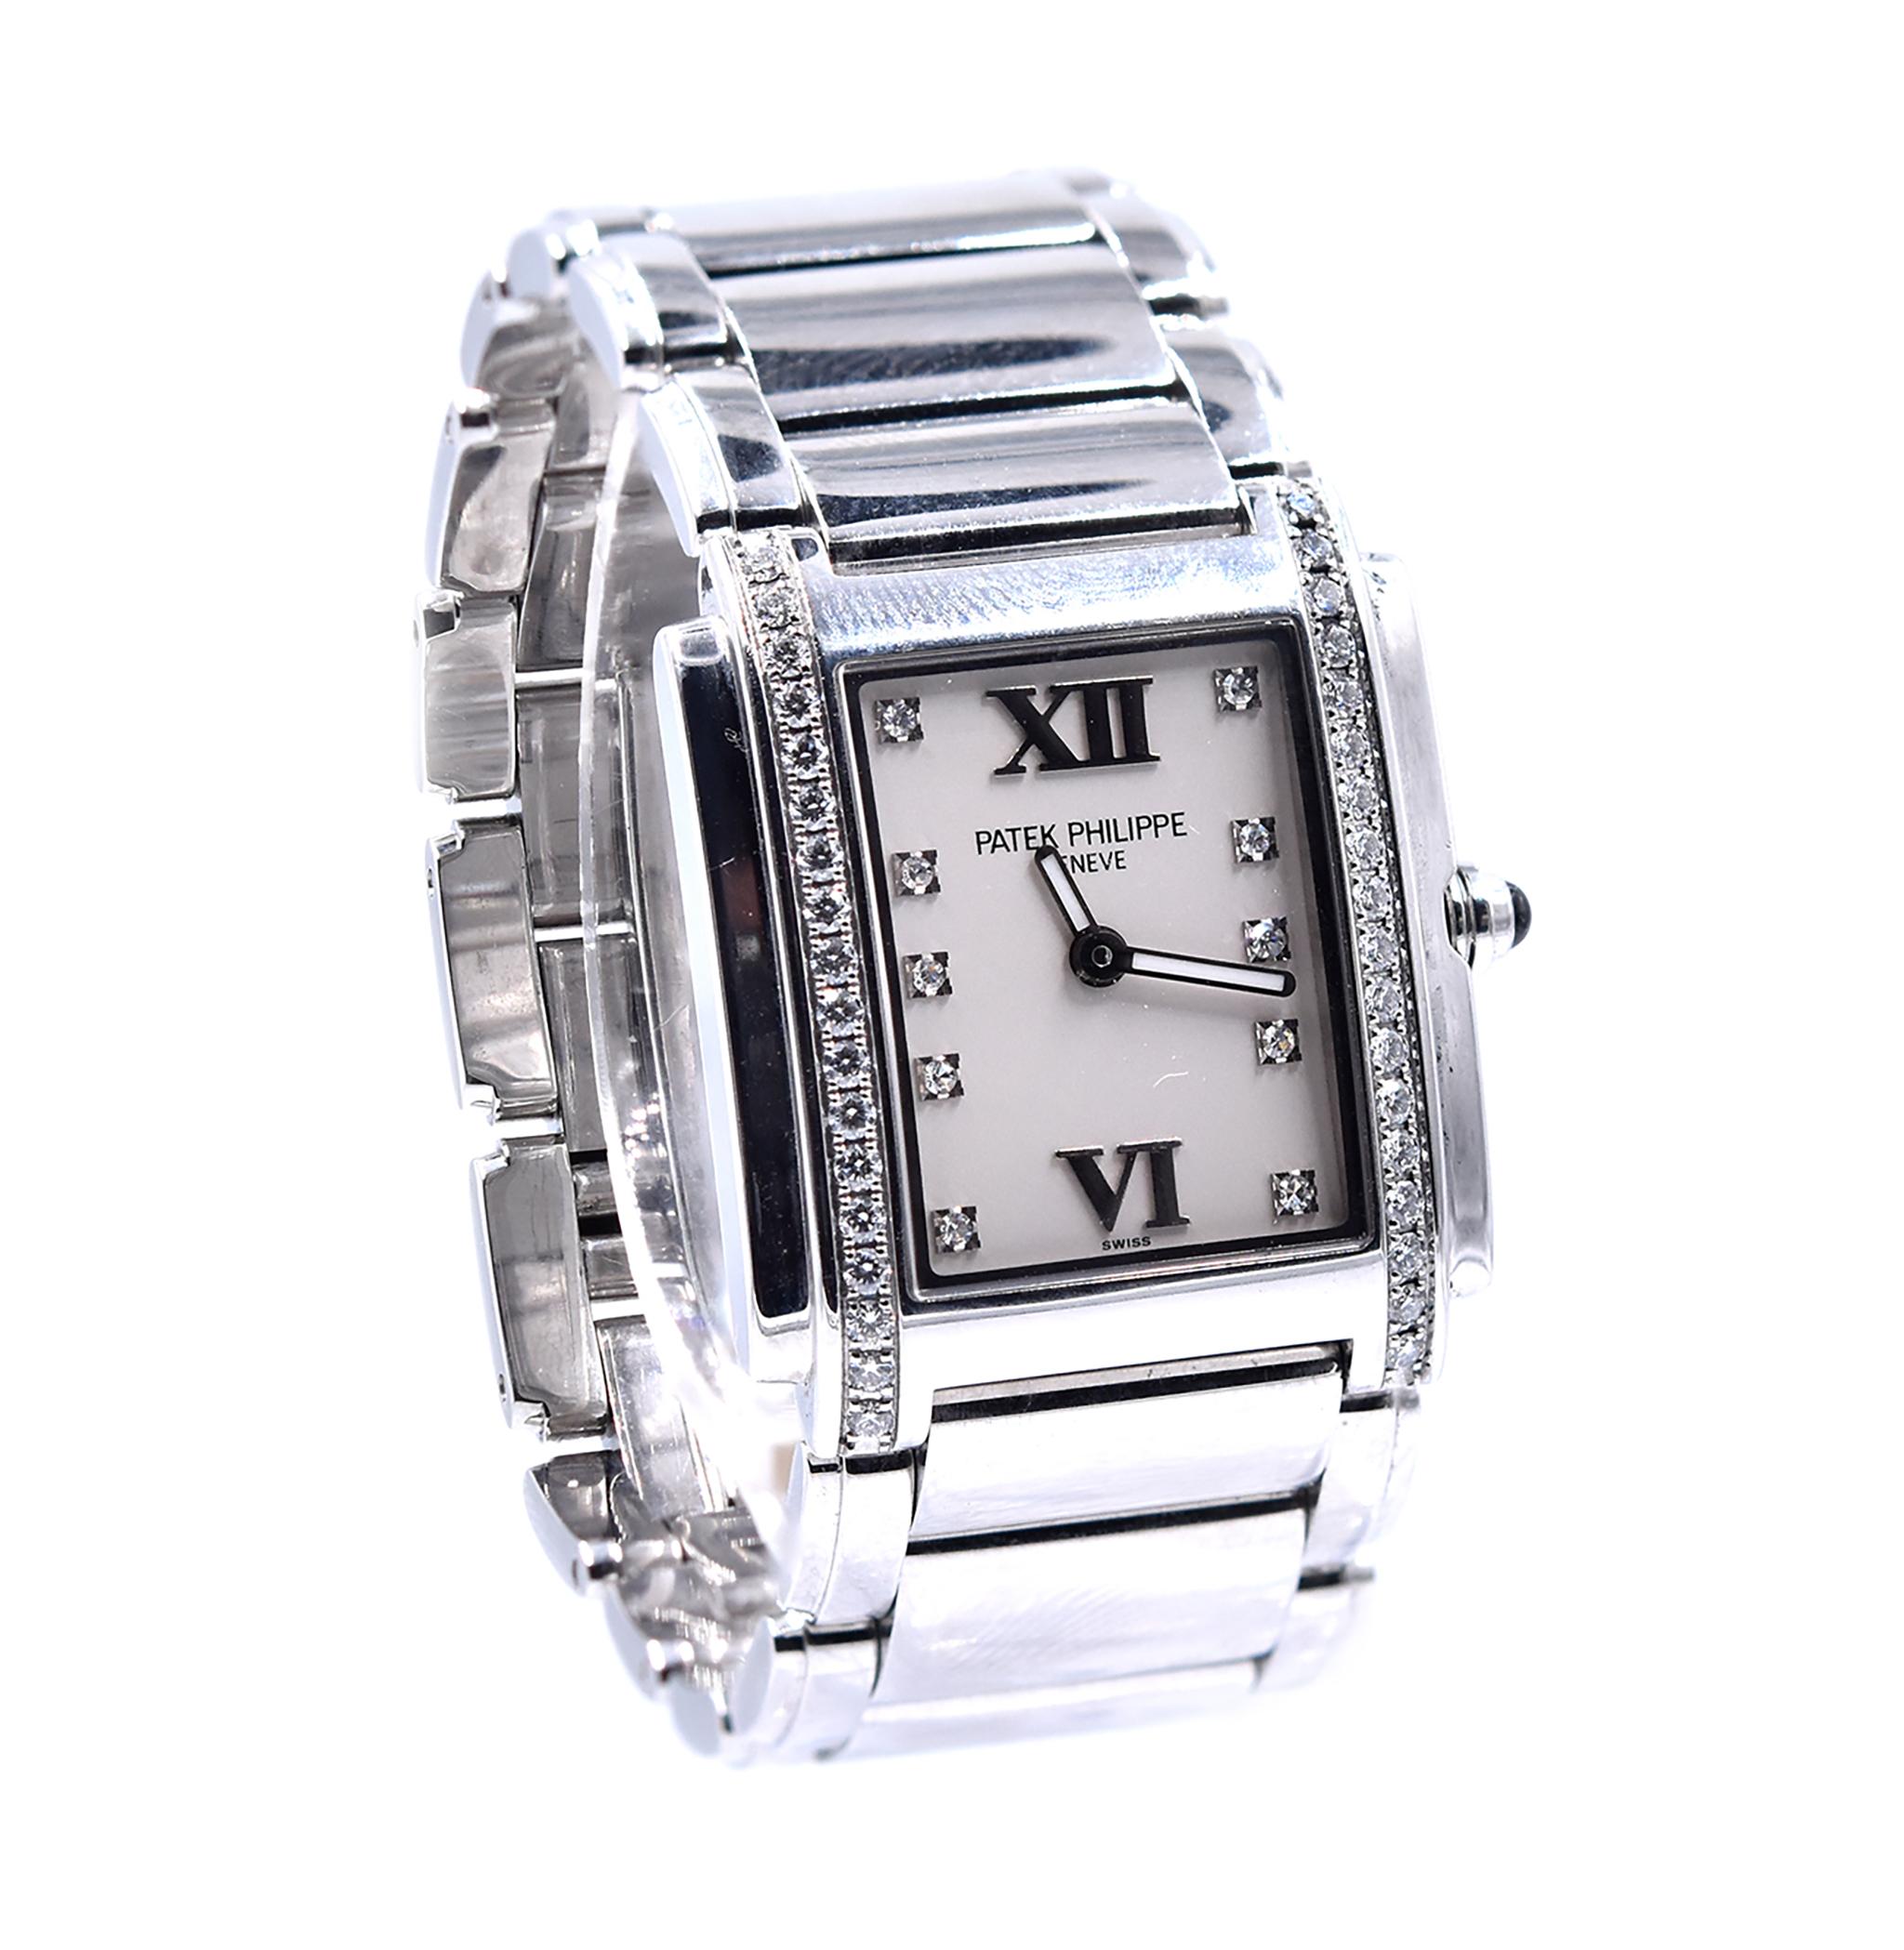 Movement: automatic
Function: hours, minuets 
Case: 25mm rectangular case, sapphire crystal, diamond bezel
Dial: white diamond dial
Band: Patek Philippe stainless steel bracelet with butterfly clasp
Reference #: 4910
Serial #: 4855XXX

Comes with